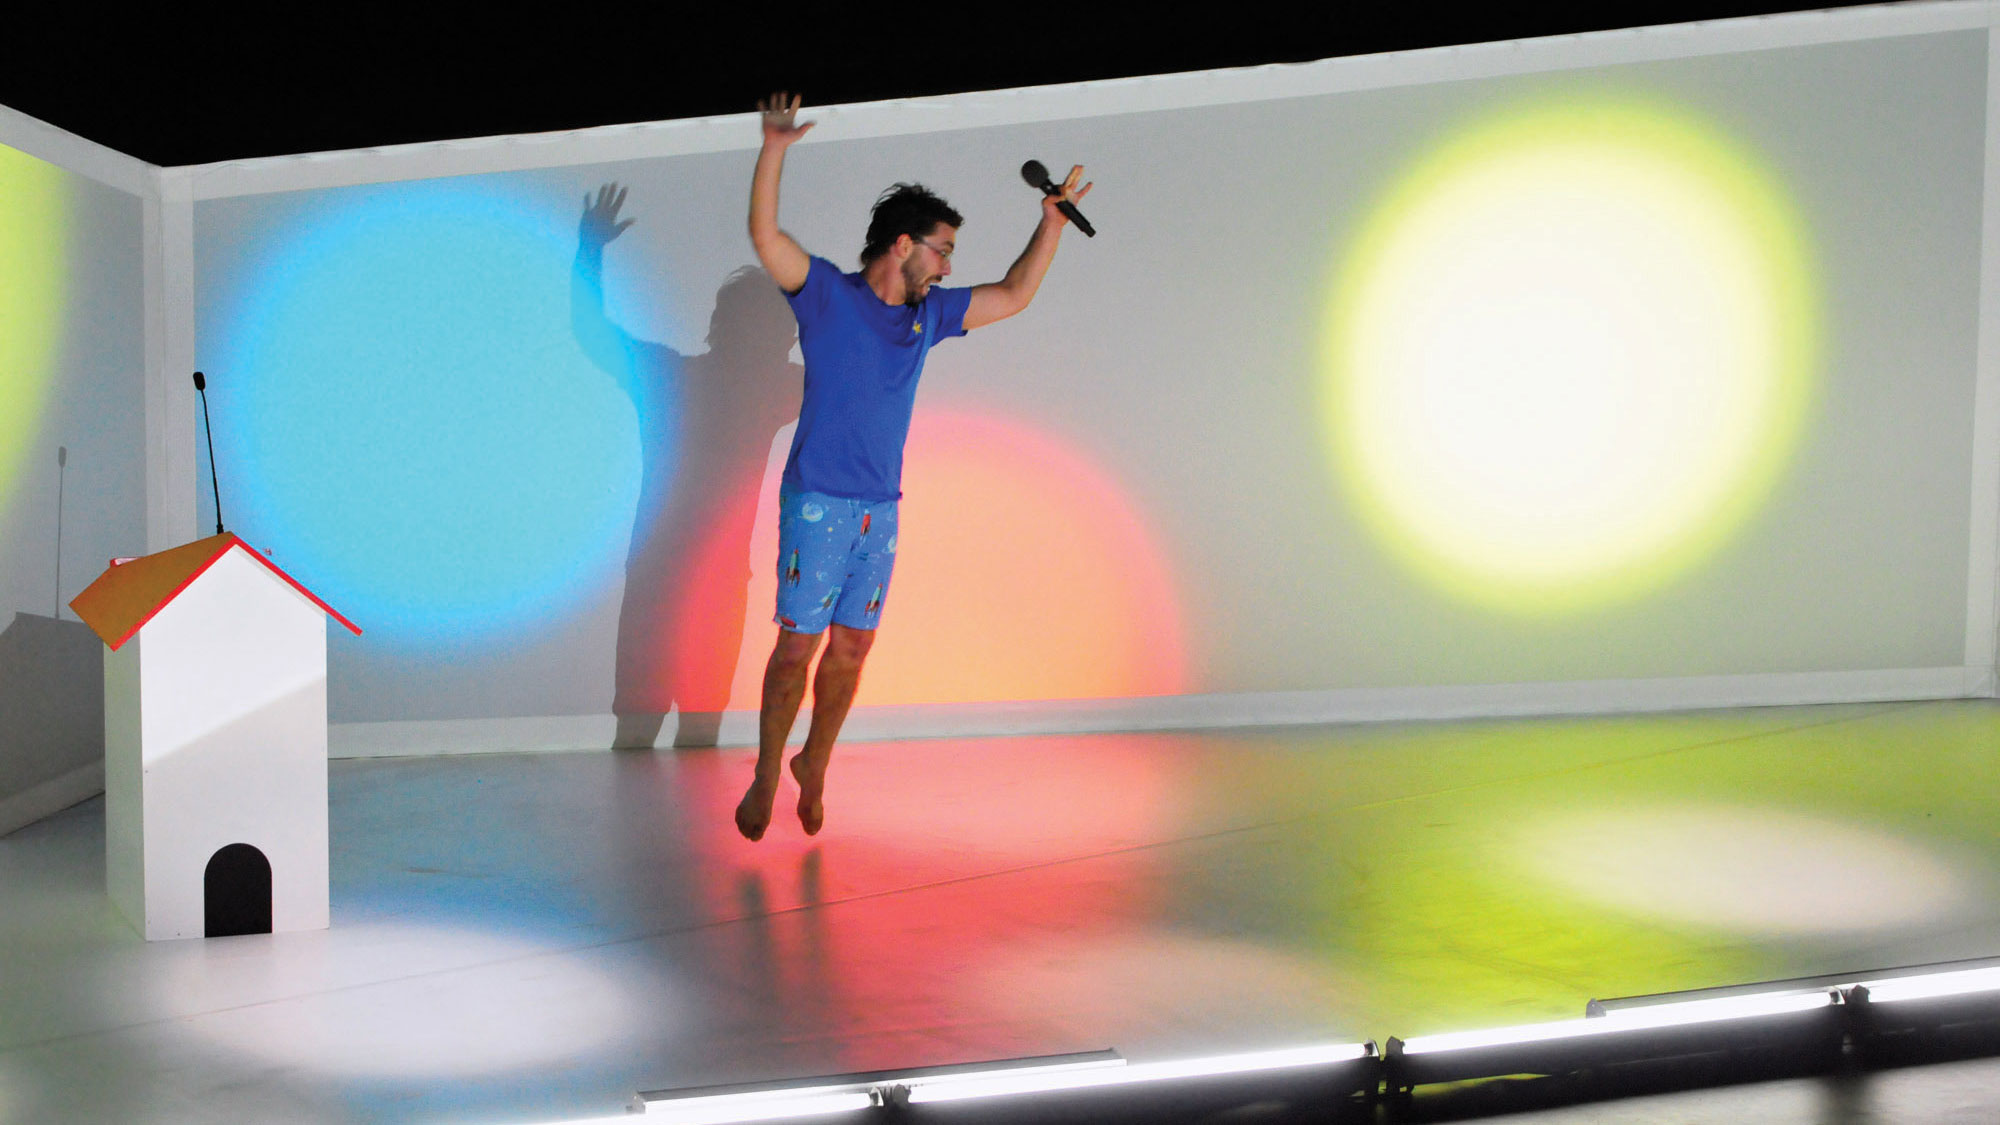 A man wearing a blue t-shirt and shorts jumping with arms up in a white room lit with primary colored lights. 